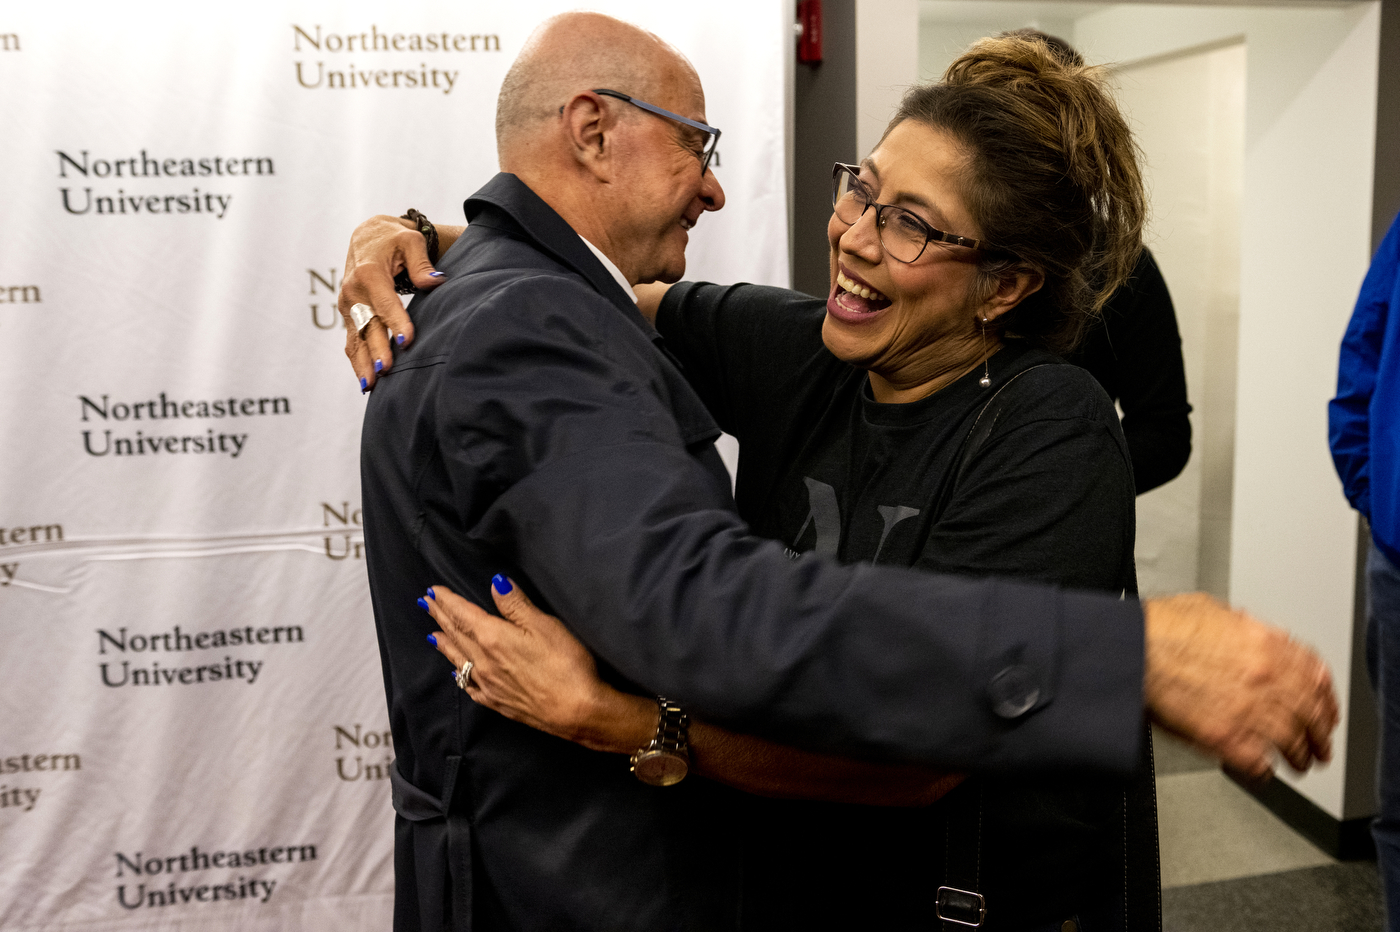 President Aoun is hugging the mother of a college student at Northeastern's Convocation. 